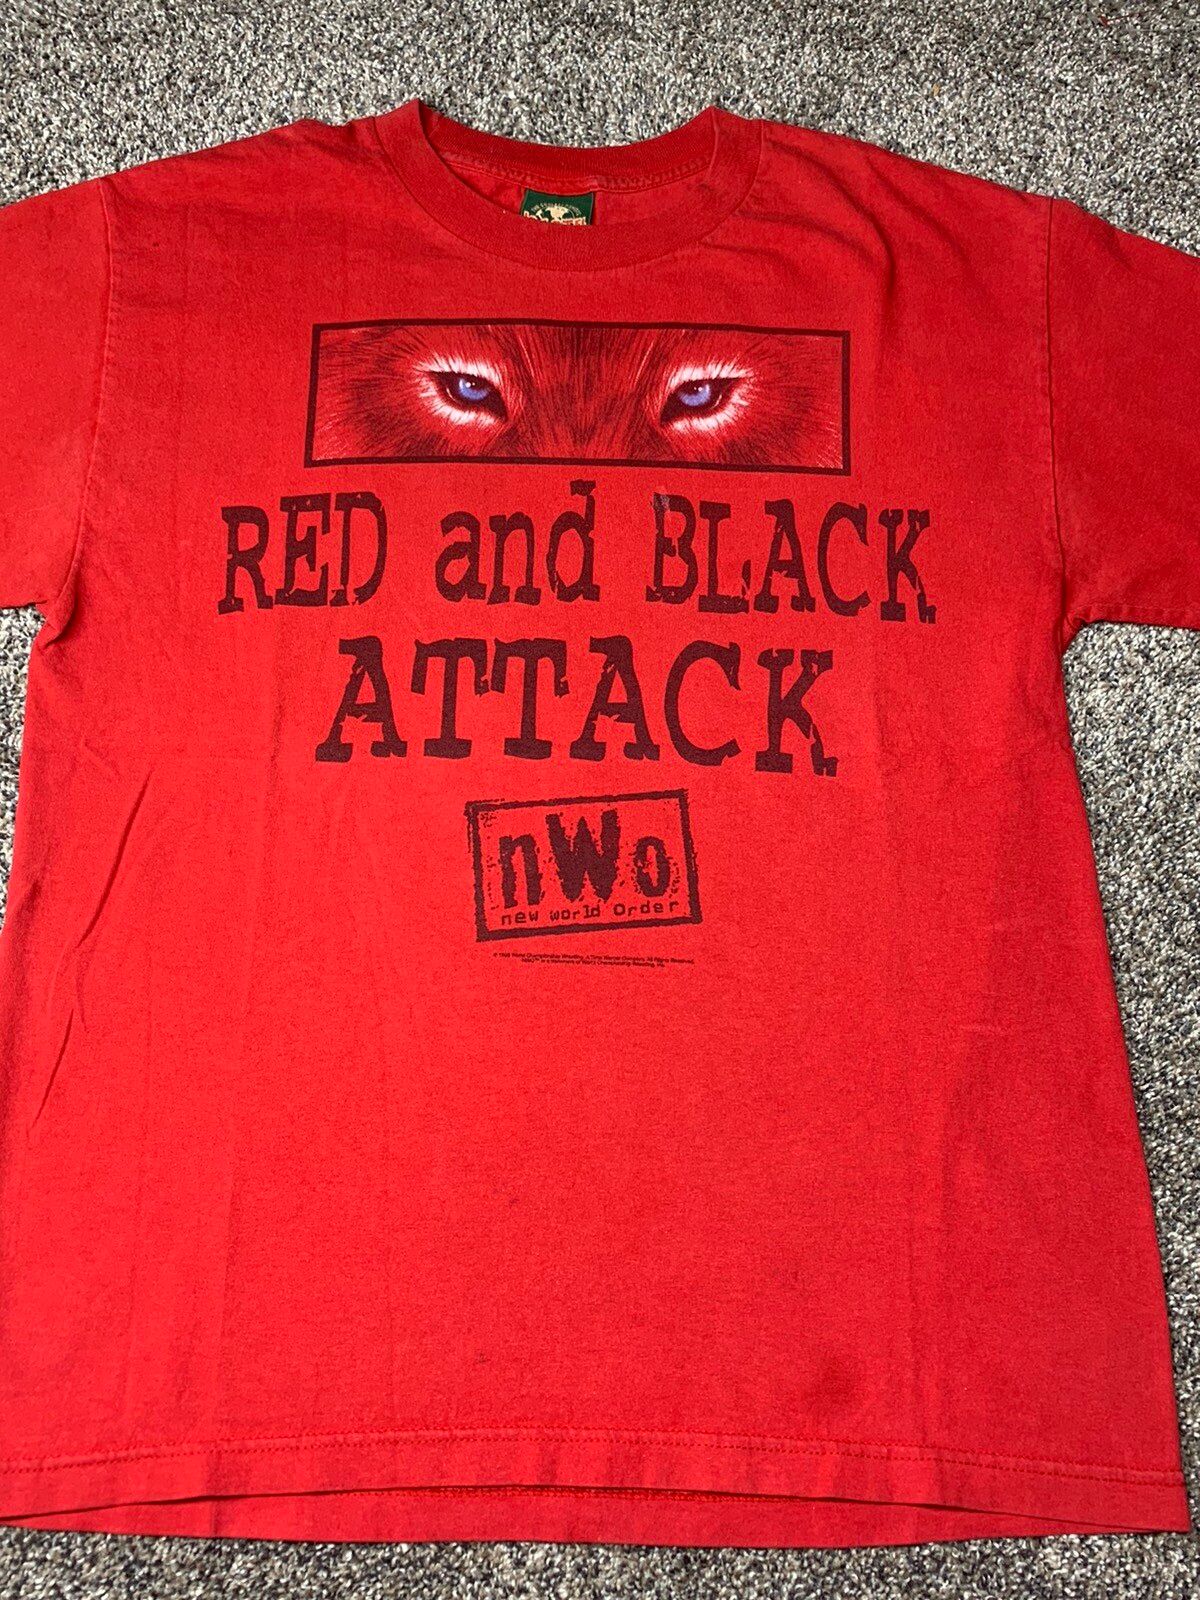 Vintage NWO black and red attack T-Shirt Size US L / EU 52-54 / 3 - 1 Preview